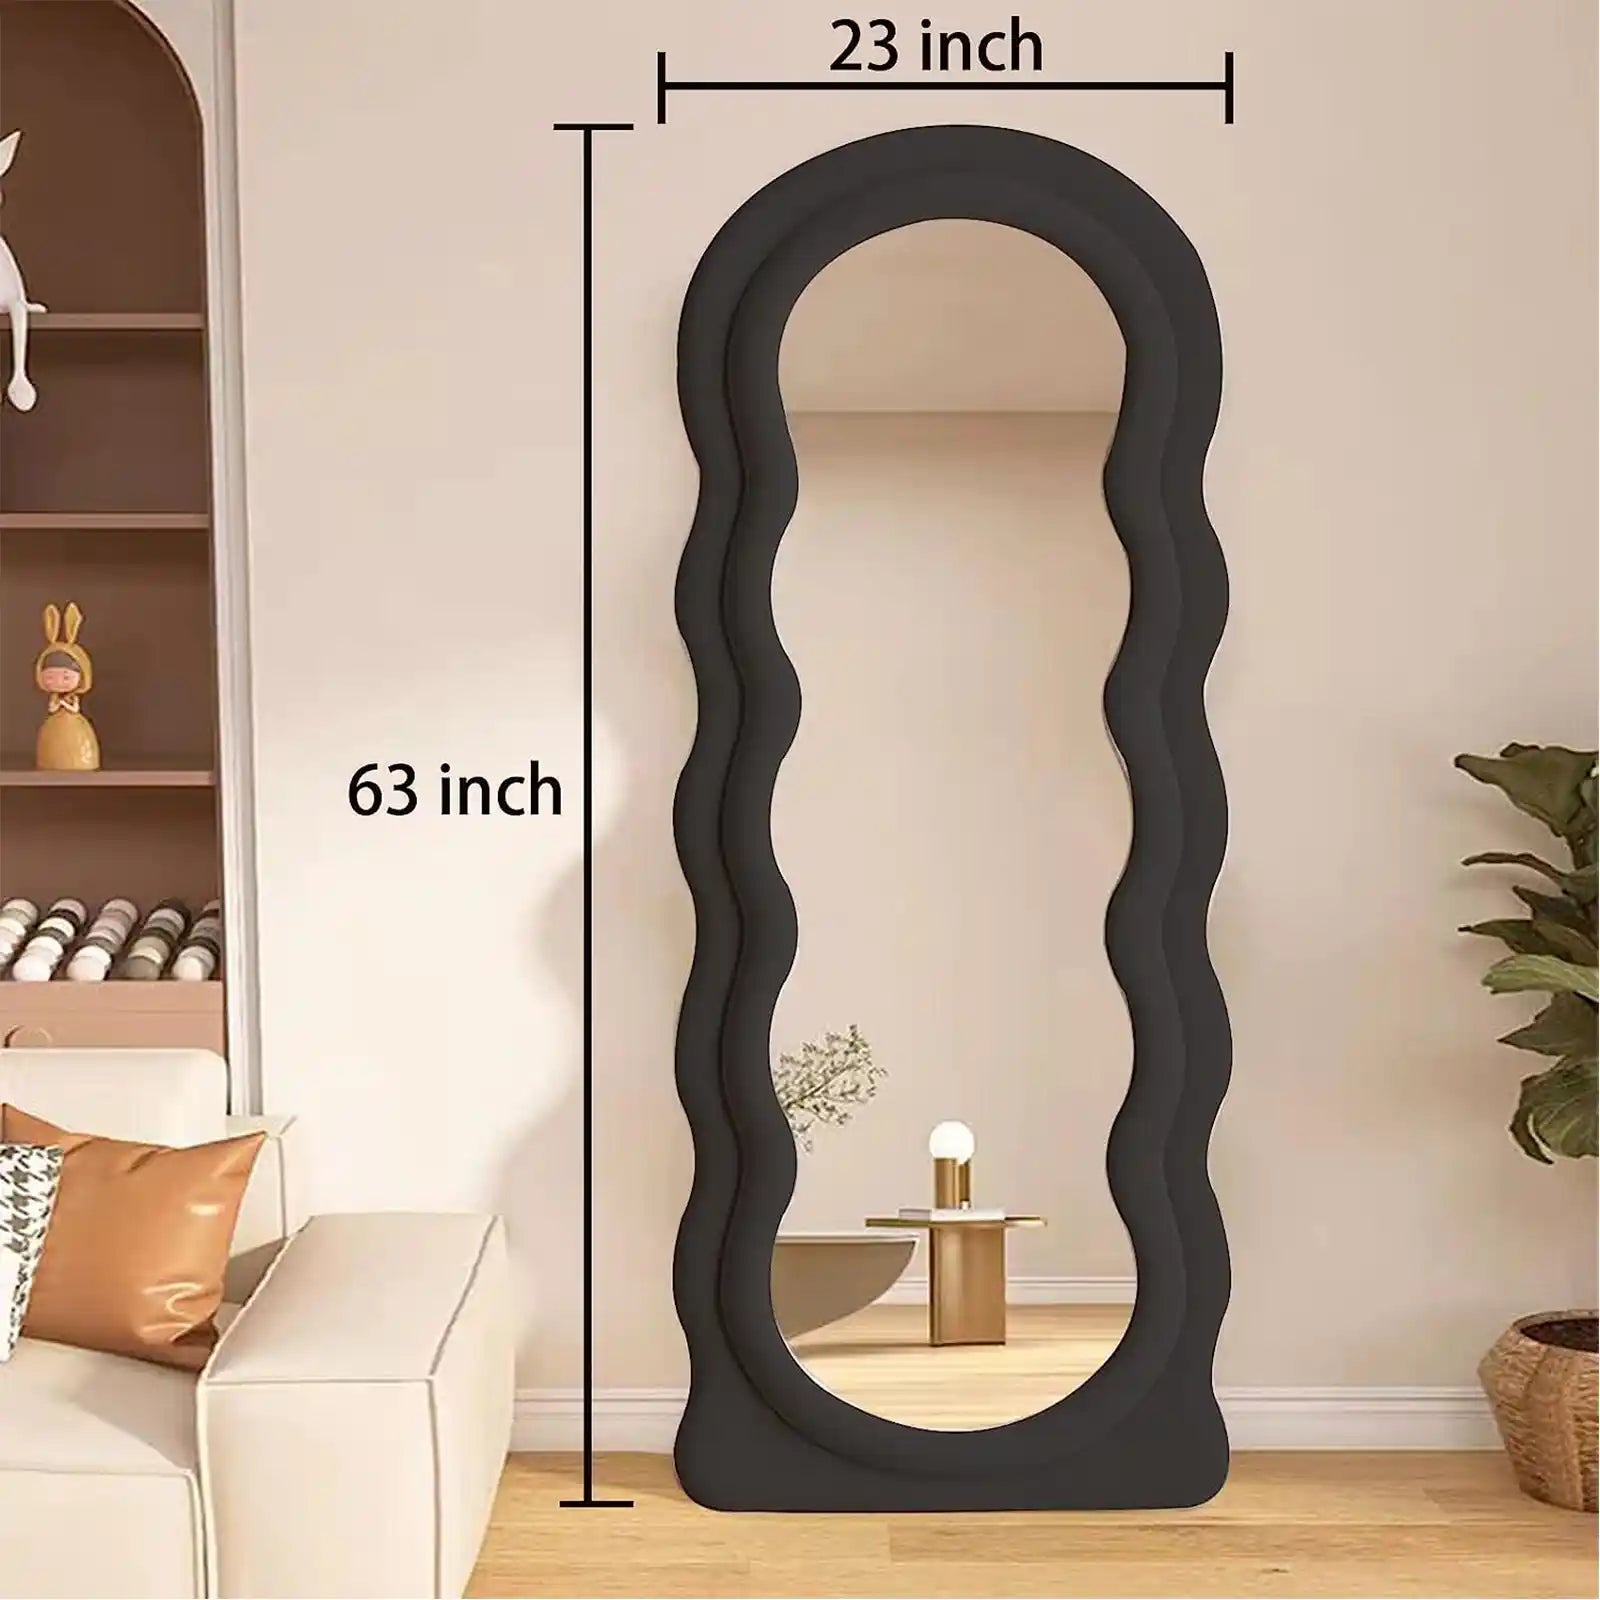 Full Length Mirror 63"x24", Irregular Wavy Mirror, Wave Floor Mirror, Wall Mounted Mirror Standing or Leaning Against Wall for Bedroom Living Room, Flannel Wrapped Wooden Frame Mirror-Black